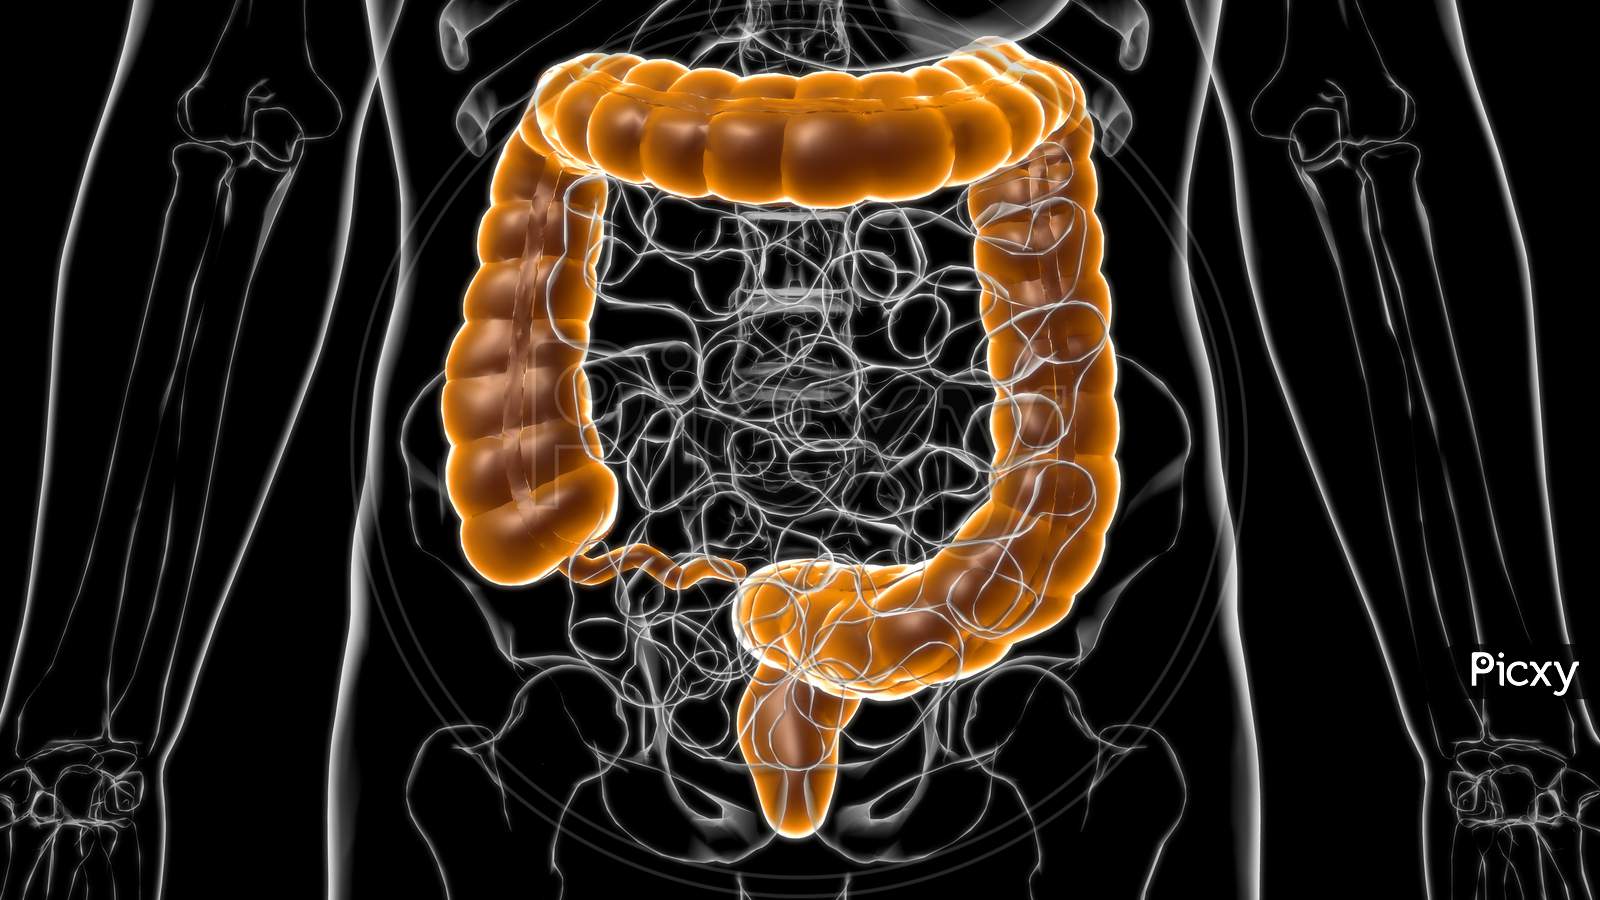 Large Intestine Human Digestive System Anatomy For Medical Concept 3D